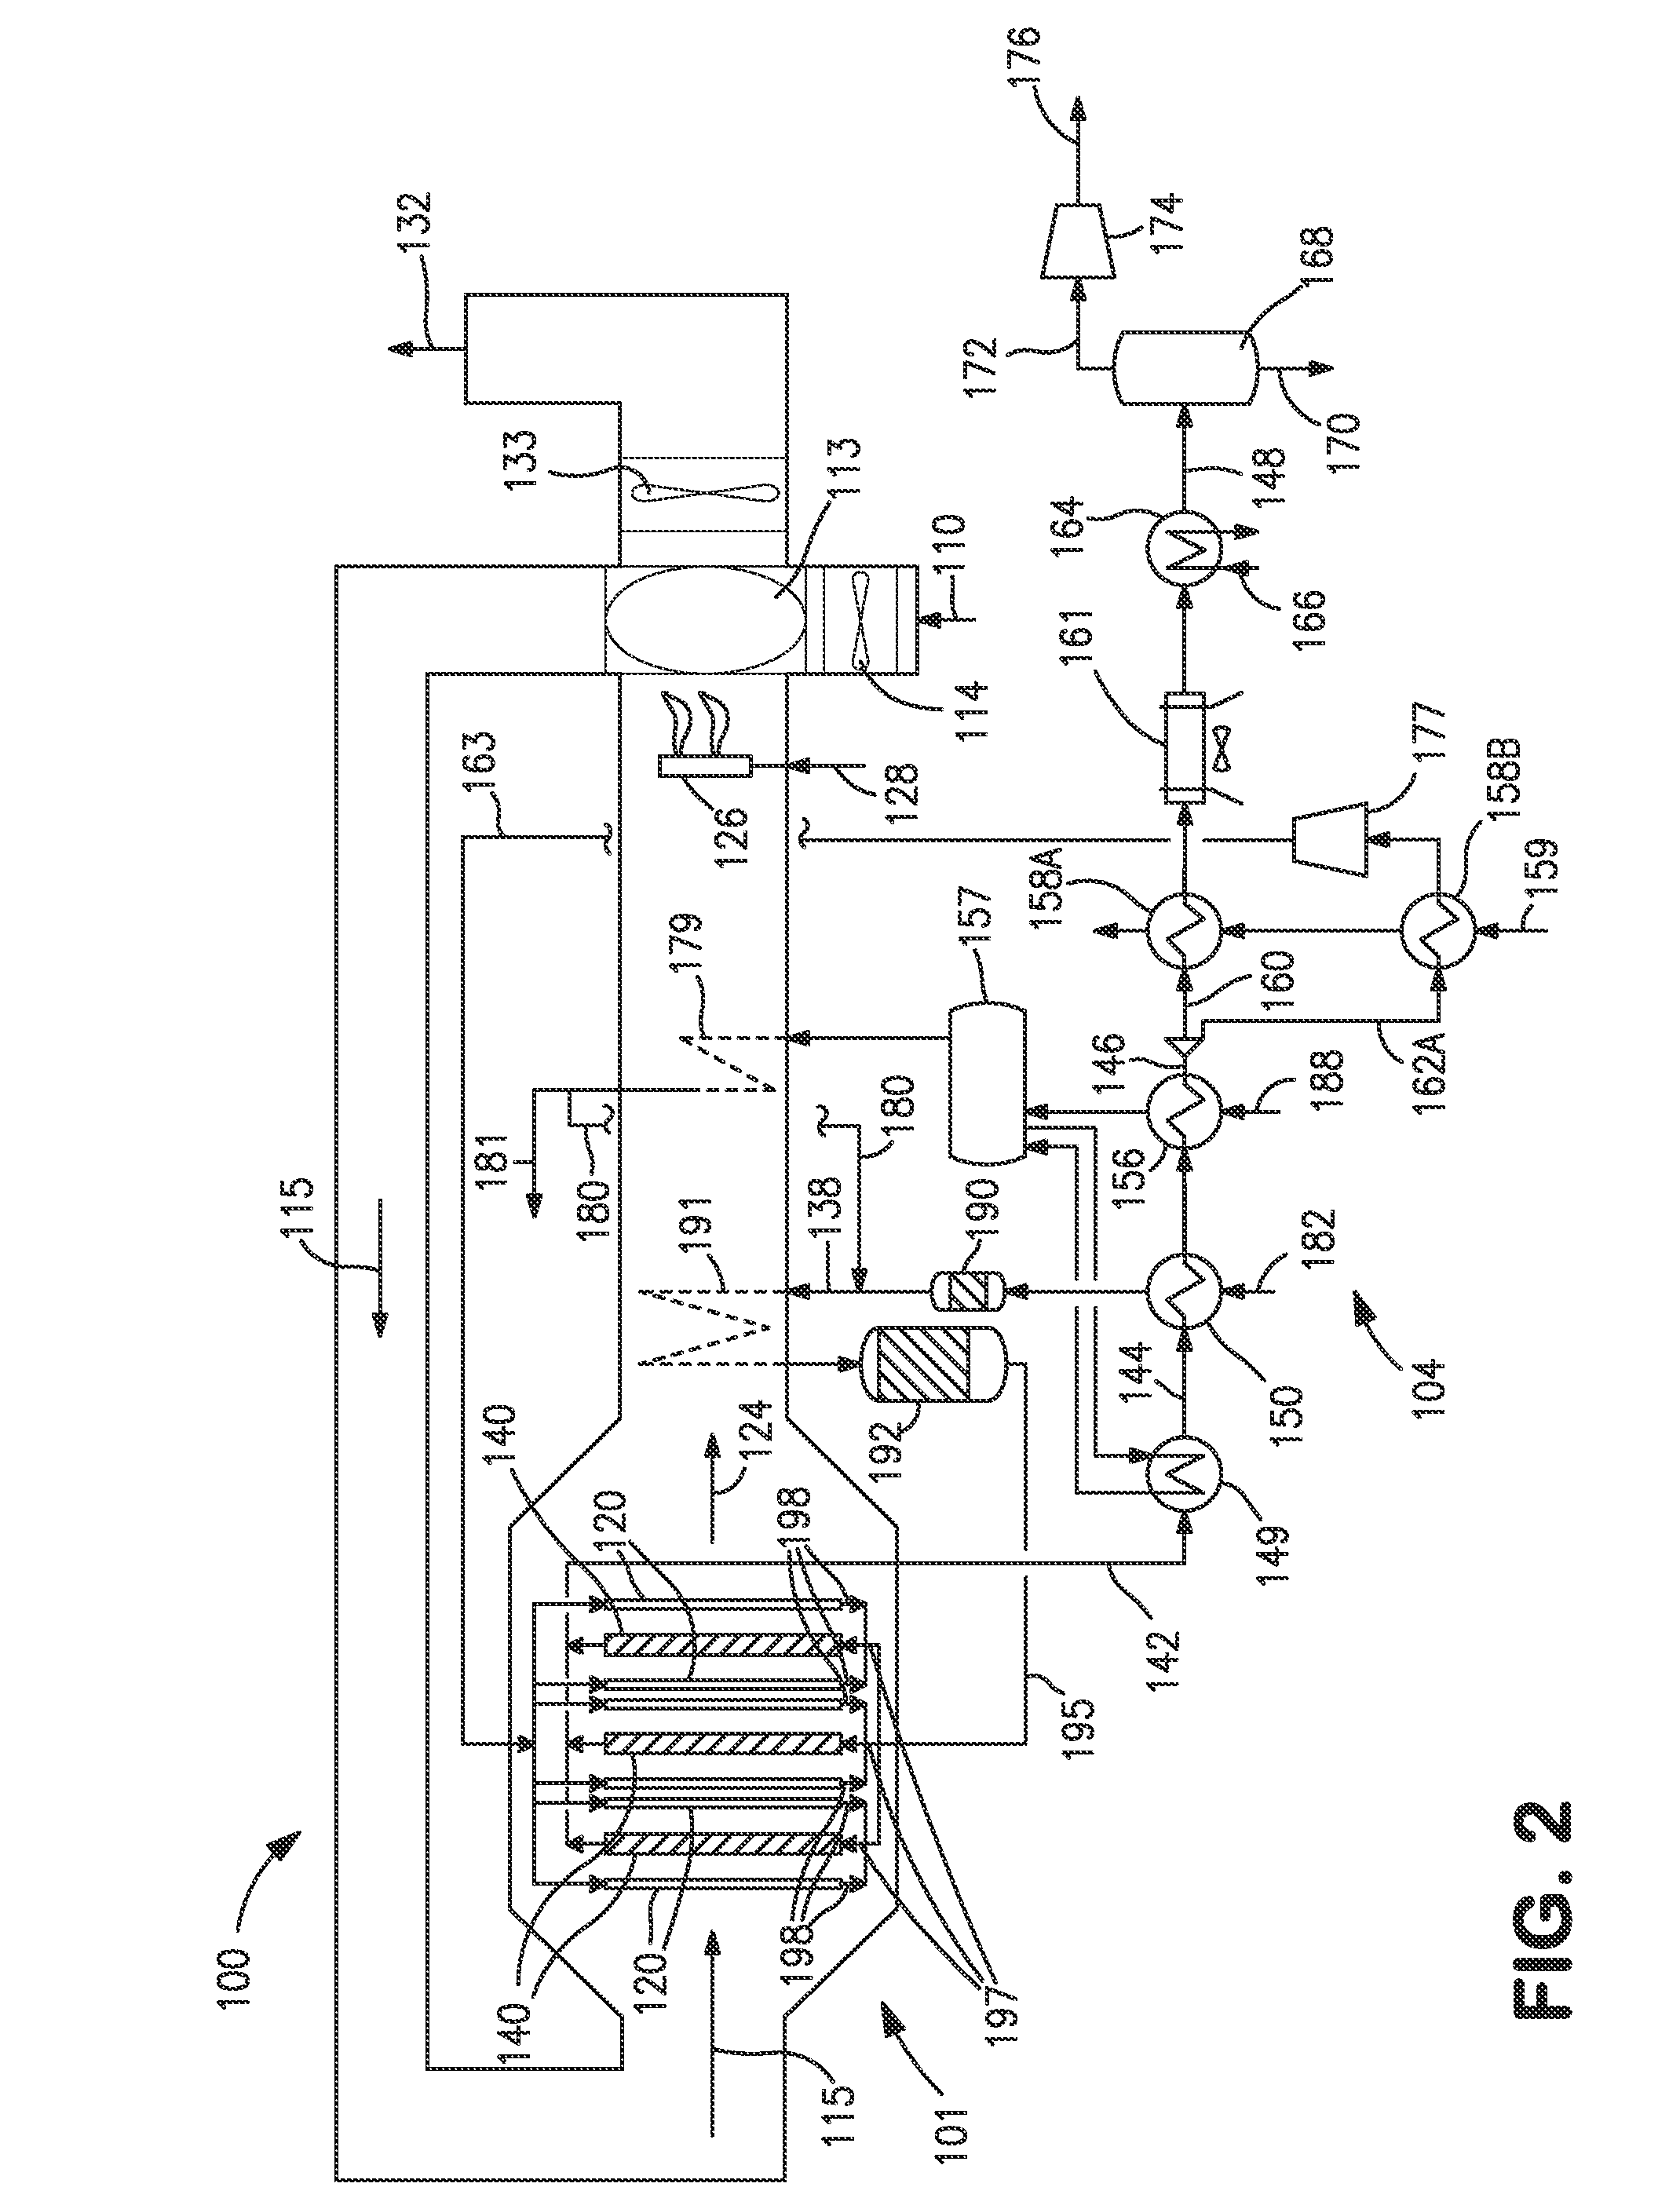 Method and system for producing methanol using an oxygen transport membrane based reforming system